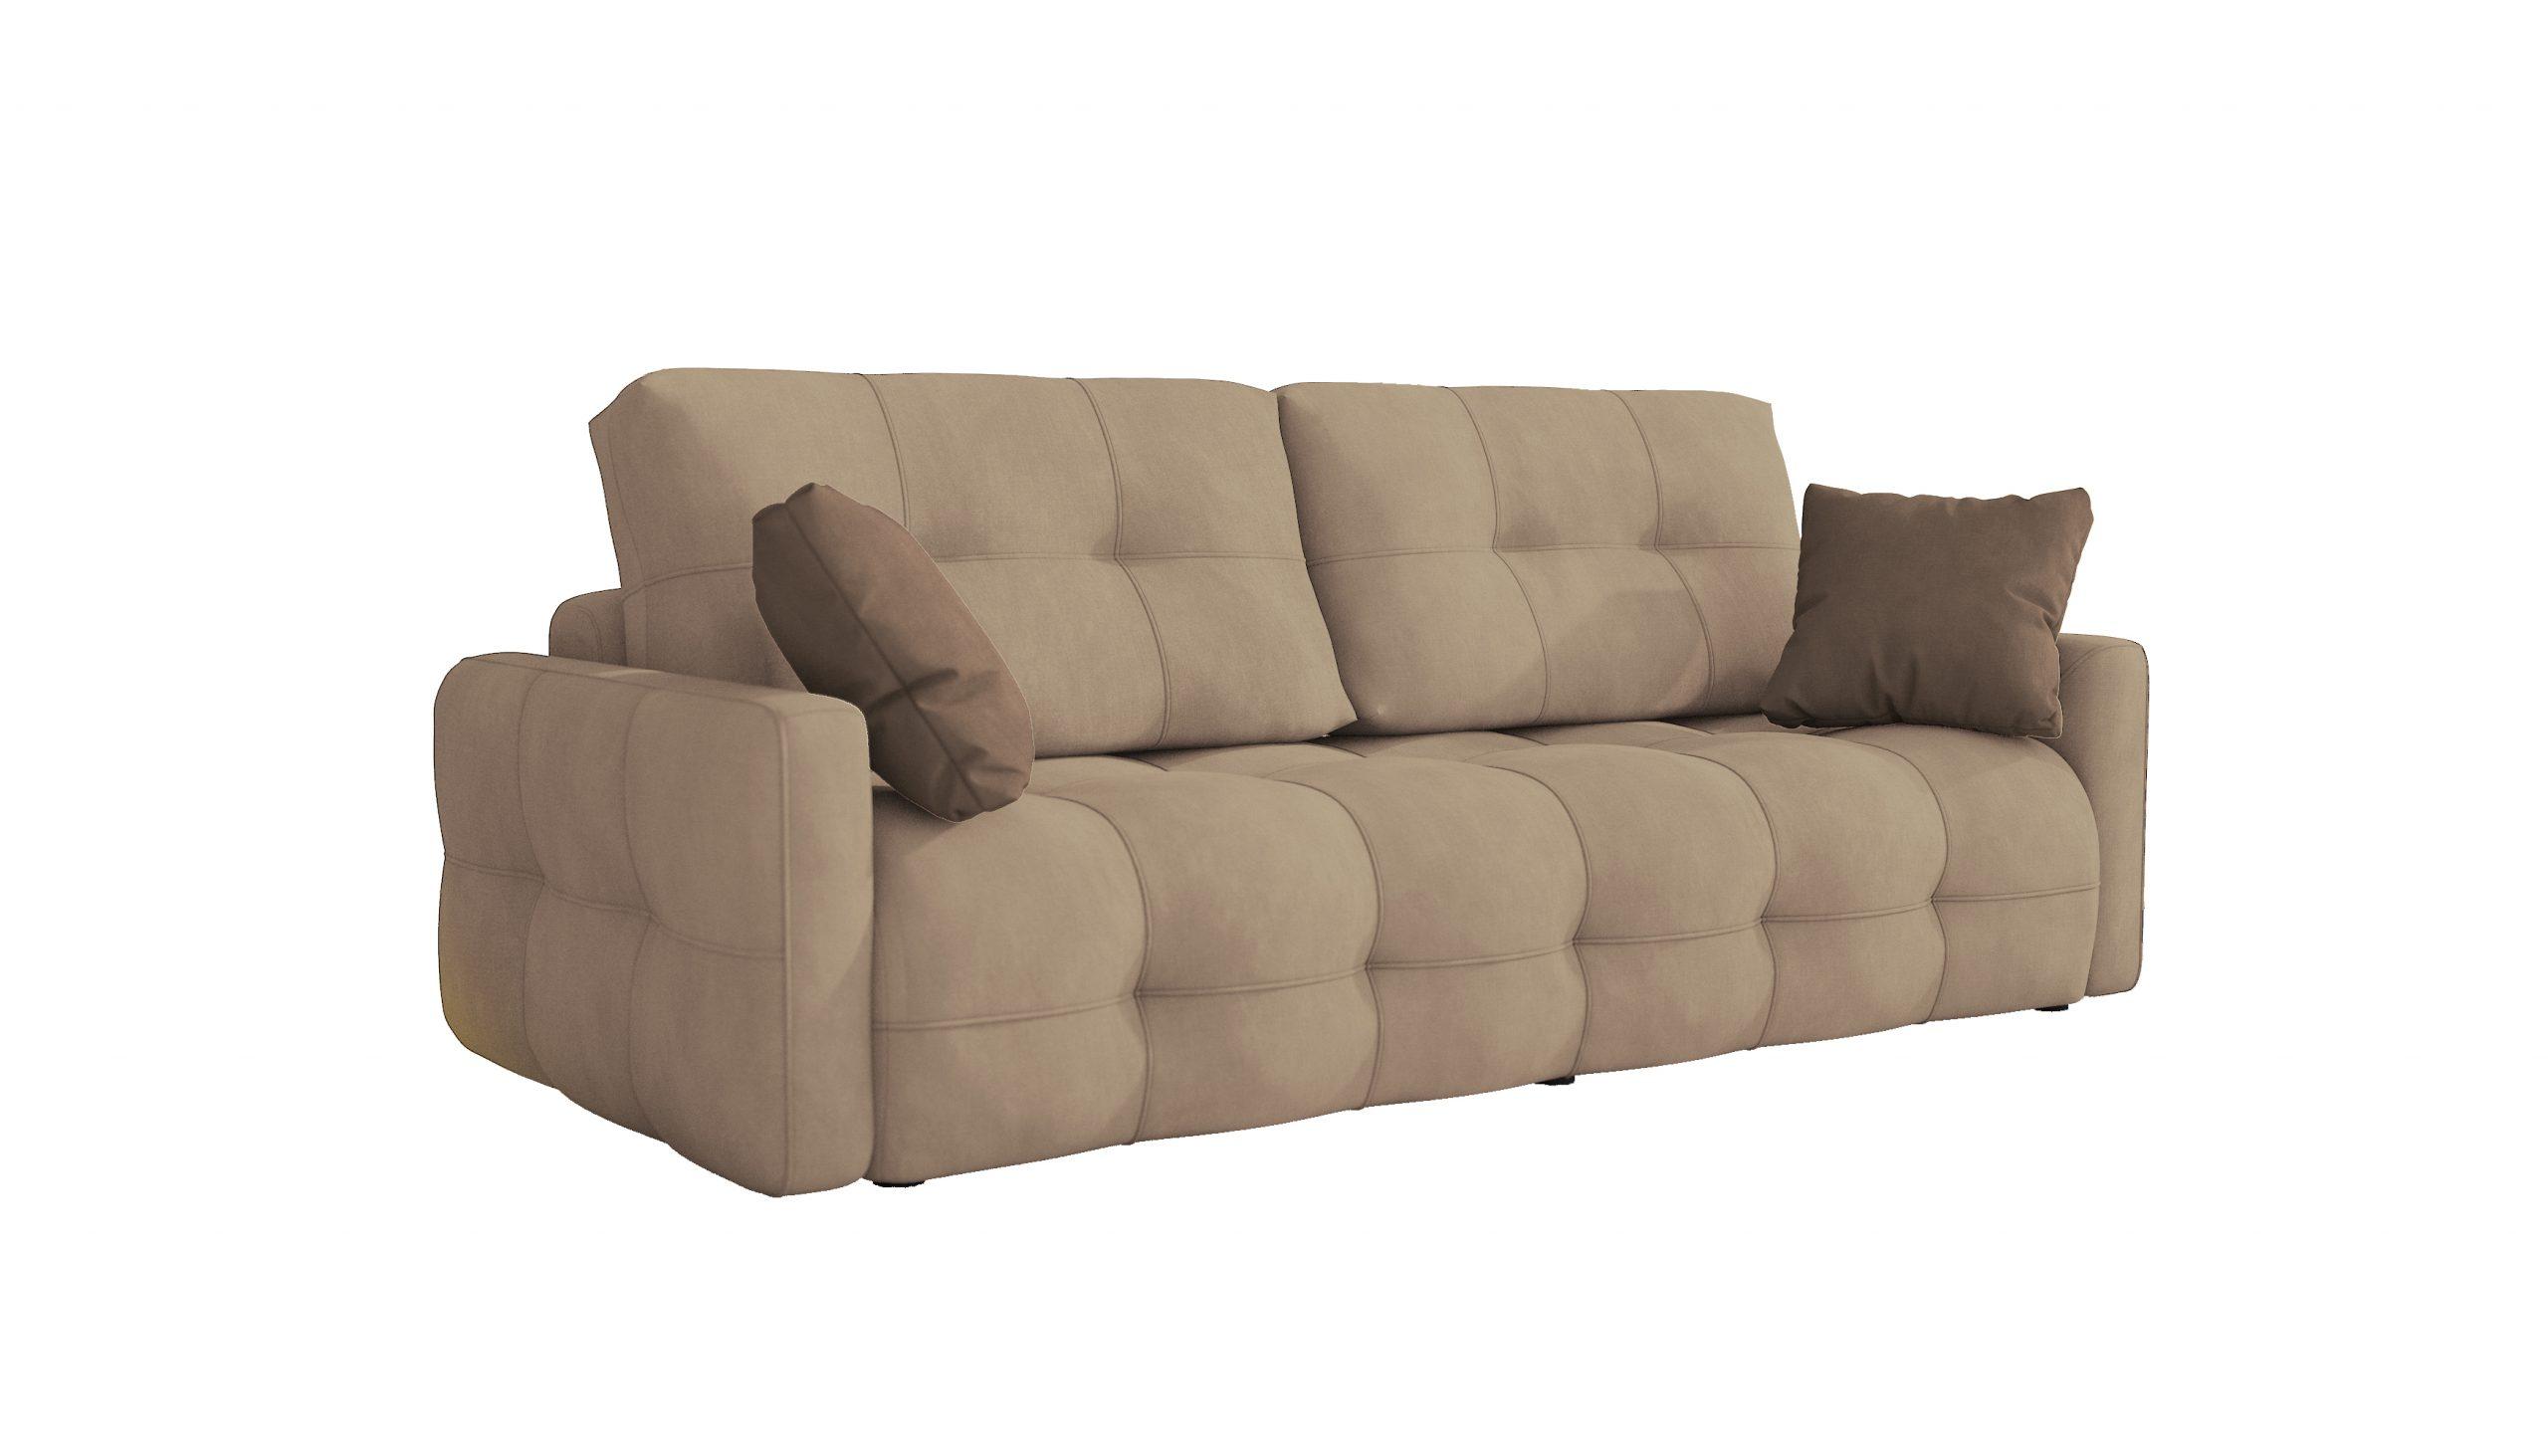   Astrid Queen Sofa Bed Astrid-Beige-Sofa-Bed  